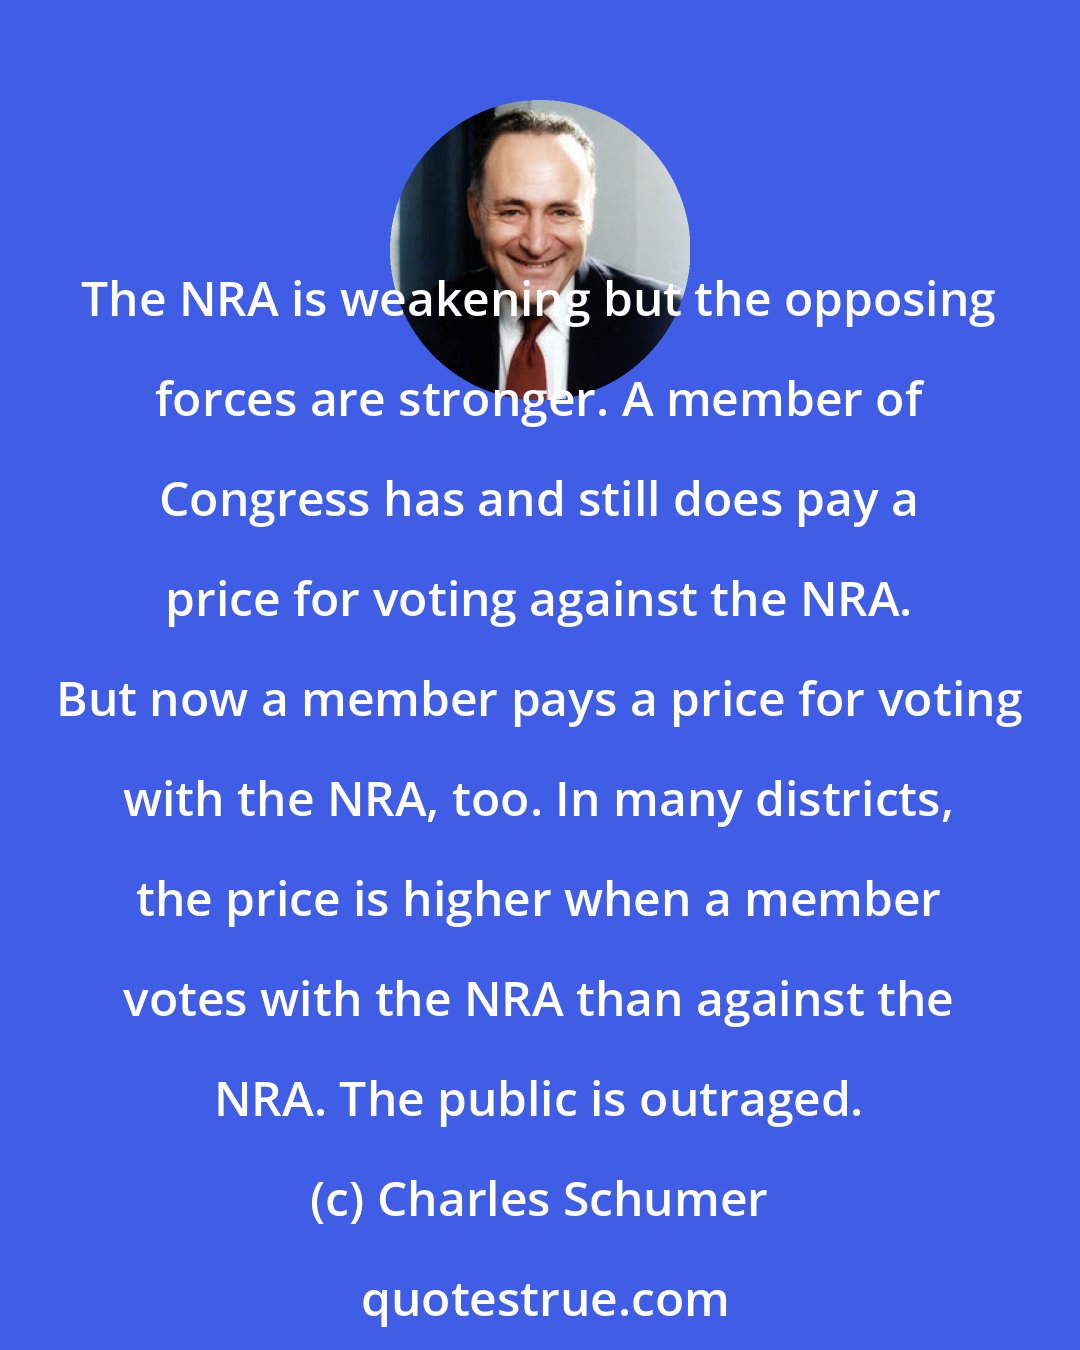 Charles Schumer: The NRA is weakening but the opposing forces are stronger. A member of Congress has and still does pay a price for voting against the NRA. But now a member pays a price for voting with the NRA, too. In many districts, the price is higher when a member votes with the NRA than against the NRA. The public is outraged.